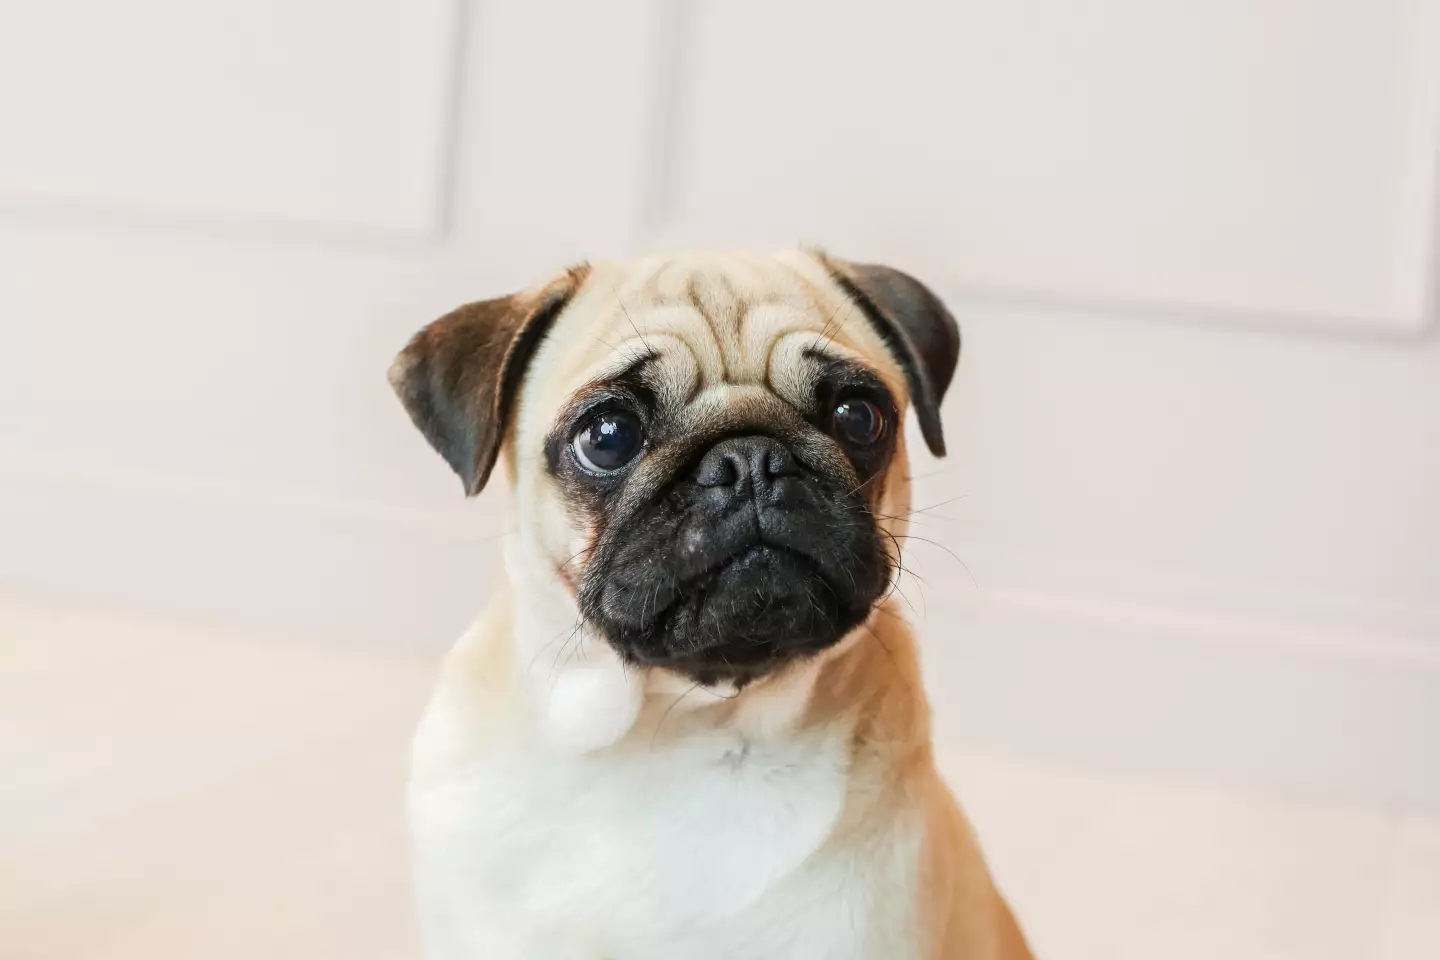 Pugs are more prone to skin and eye health issues.